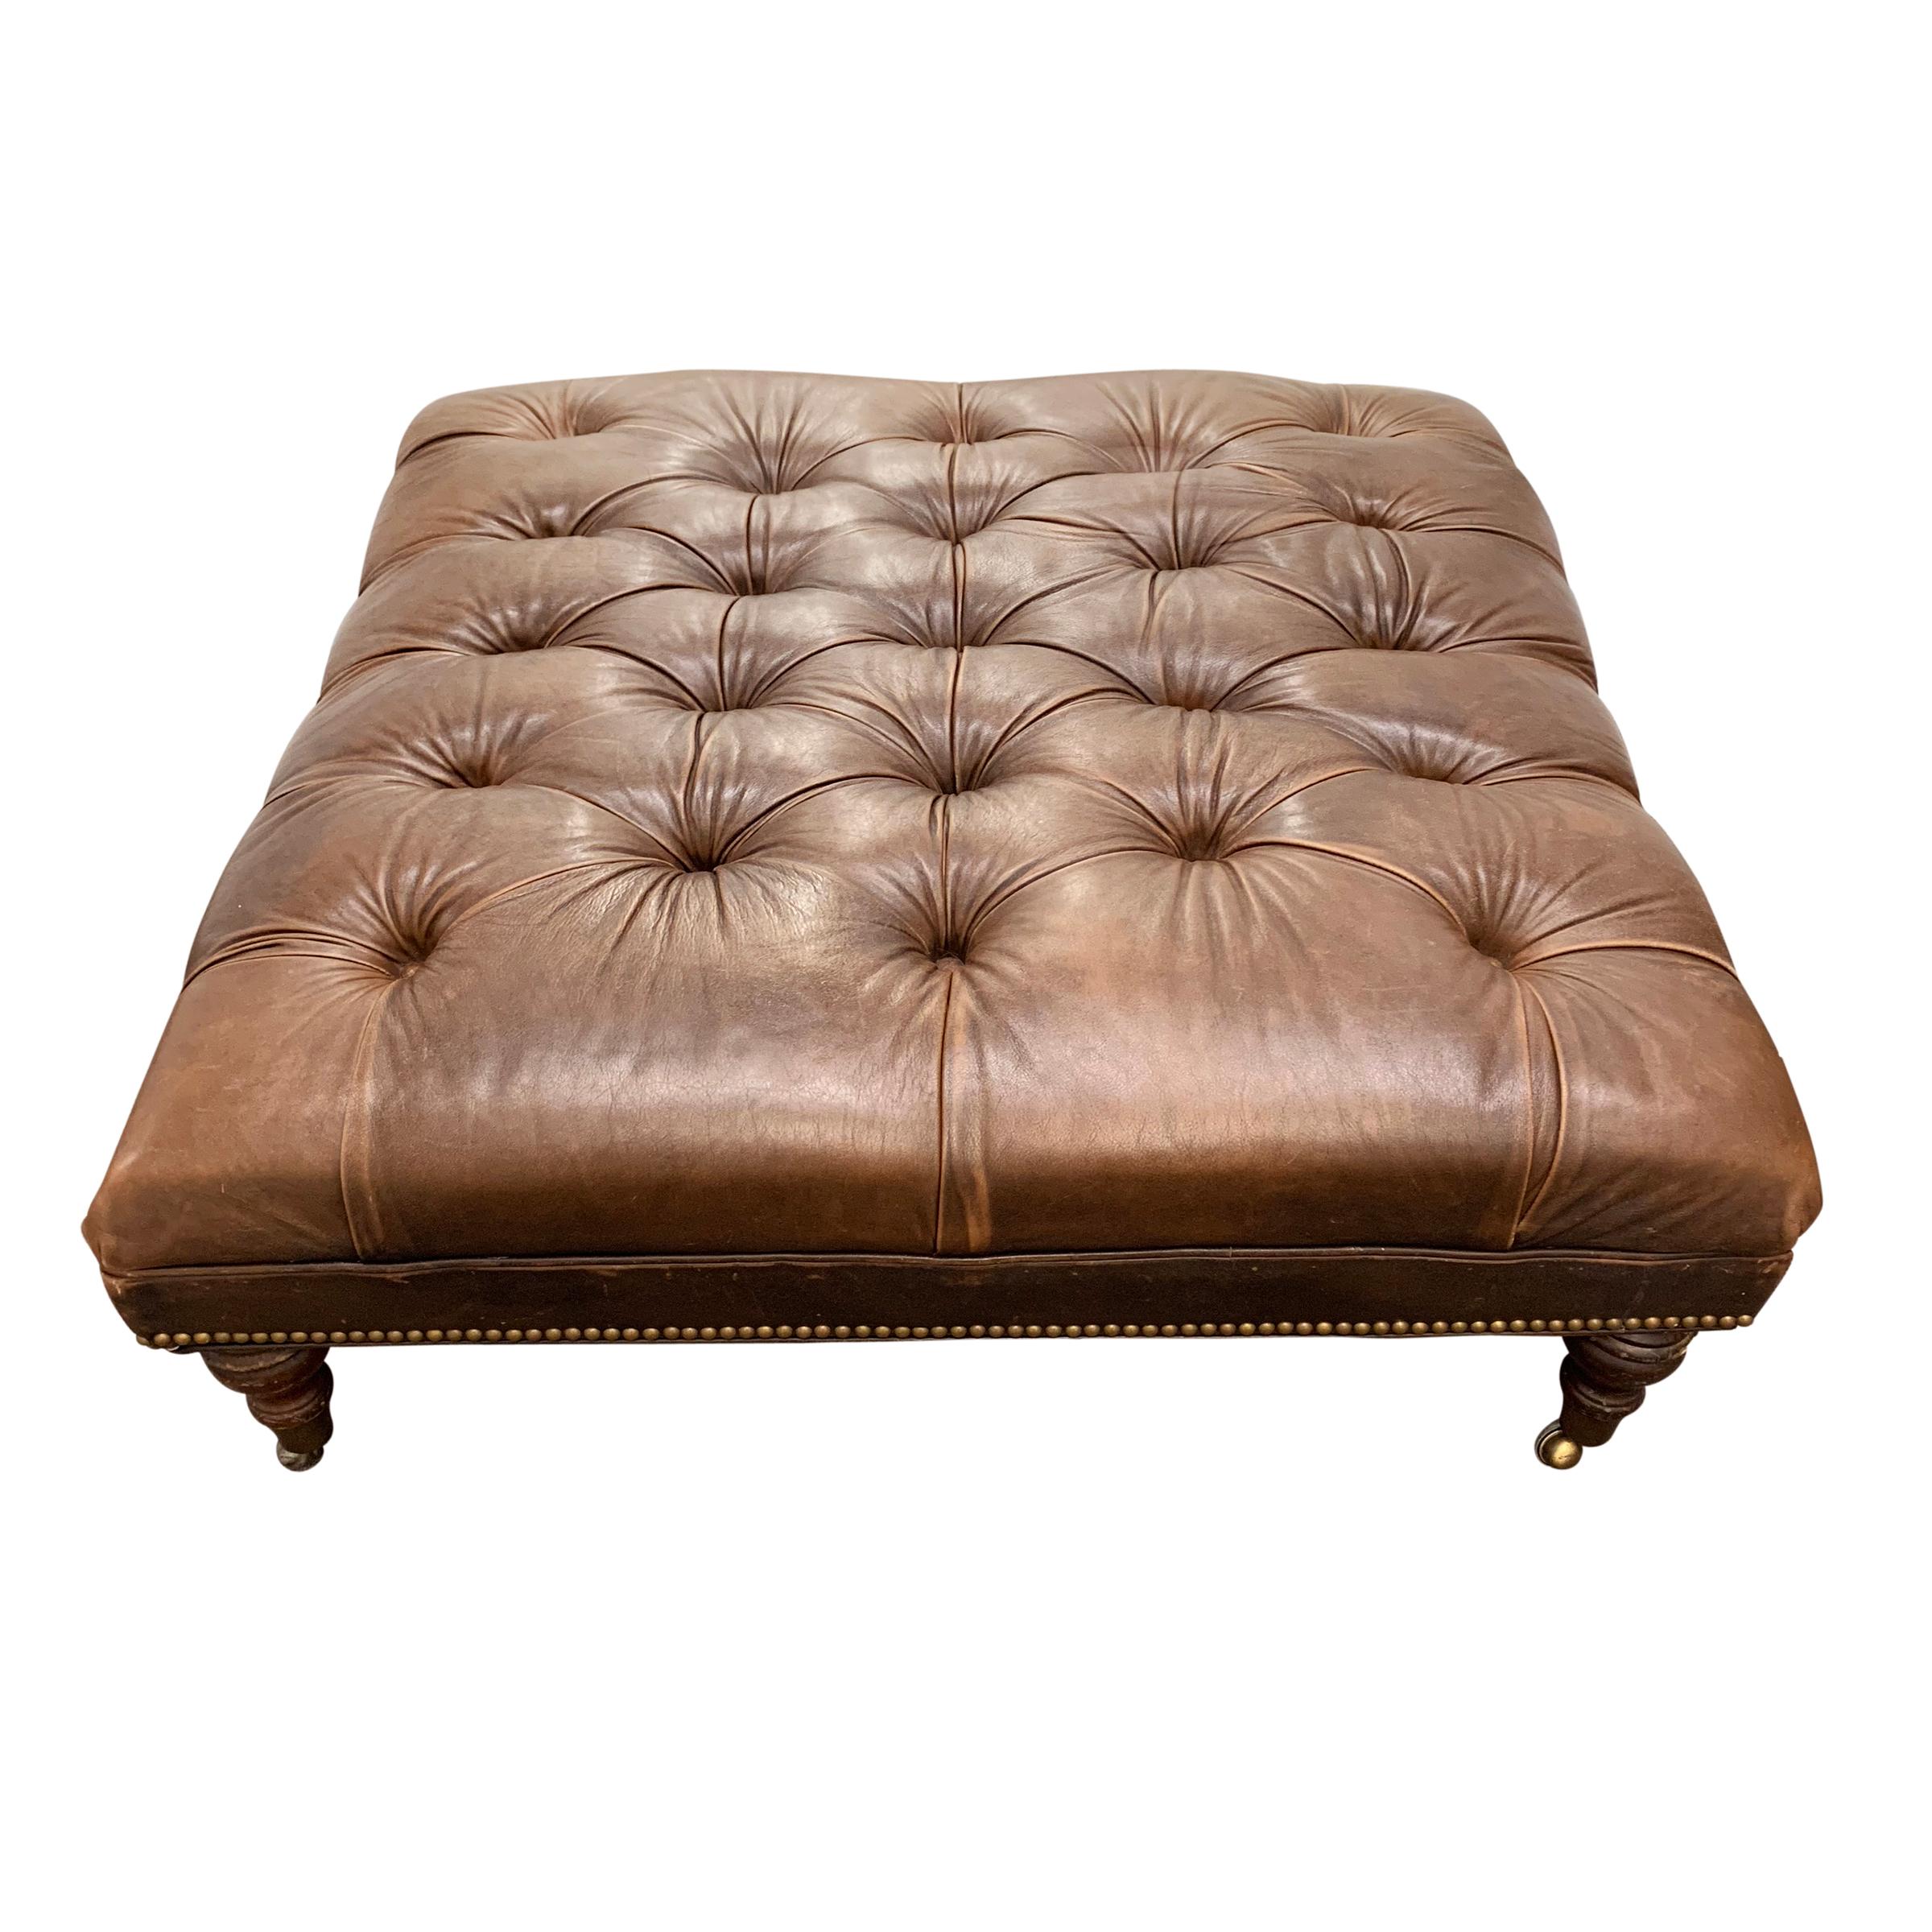 A vintage American tufted leather ottoman of large size with brass nailhead trim and turned wood legs on casters.